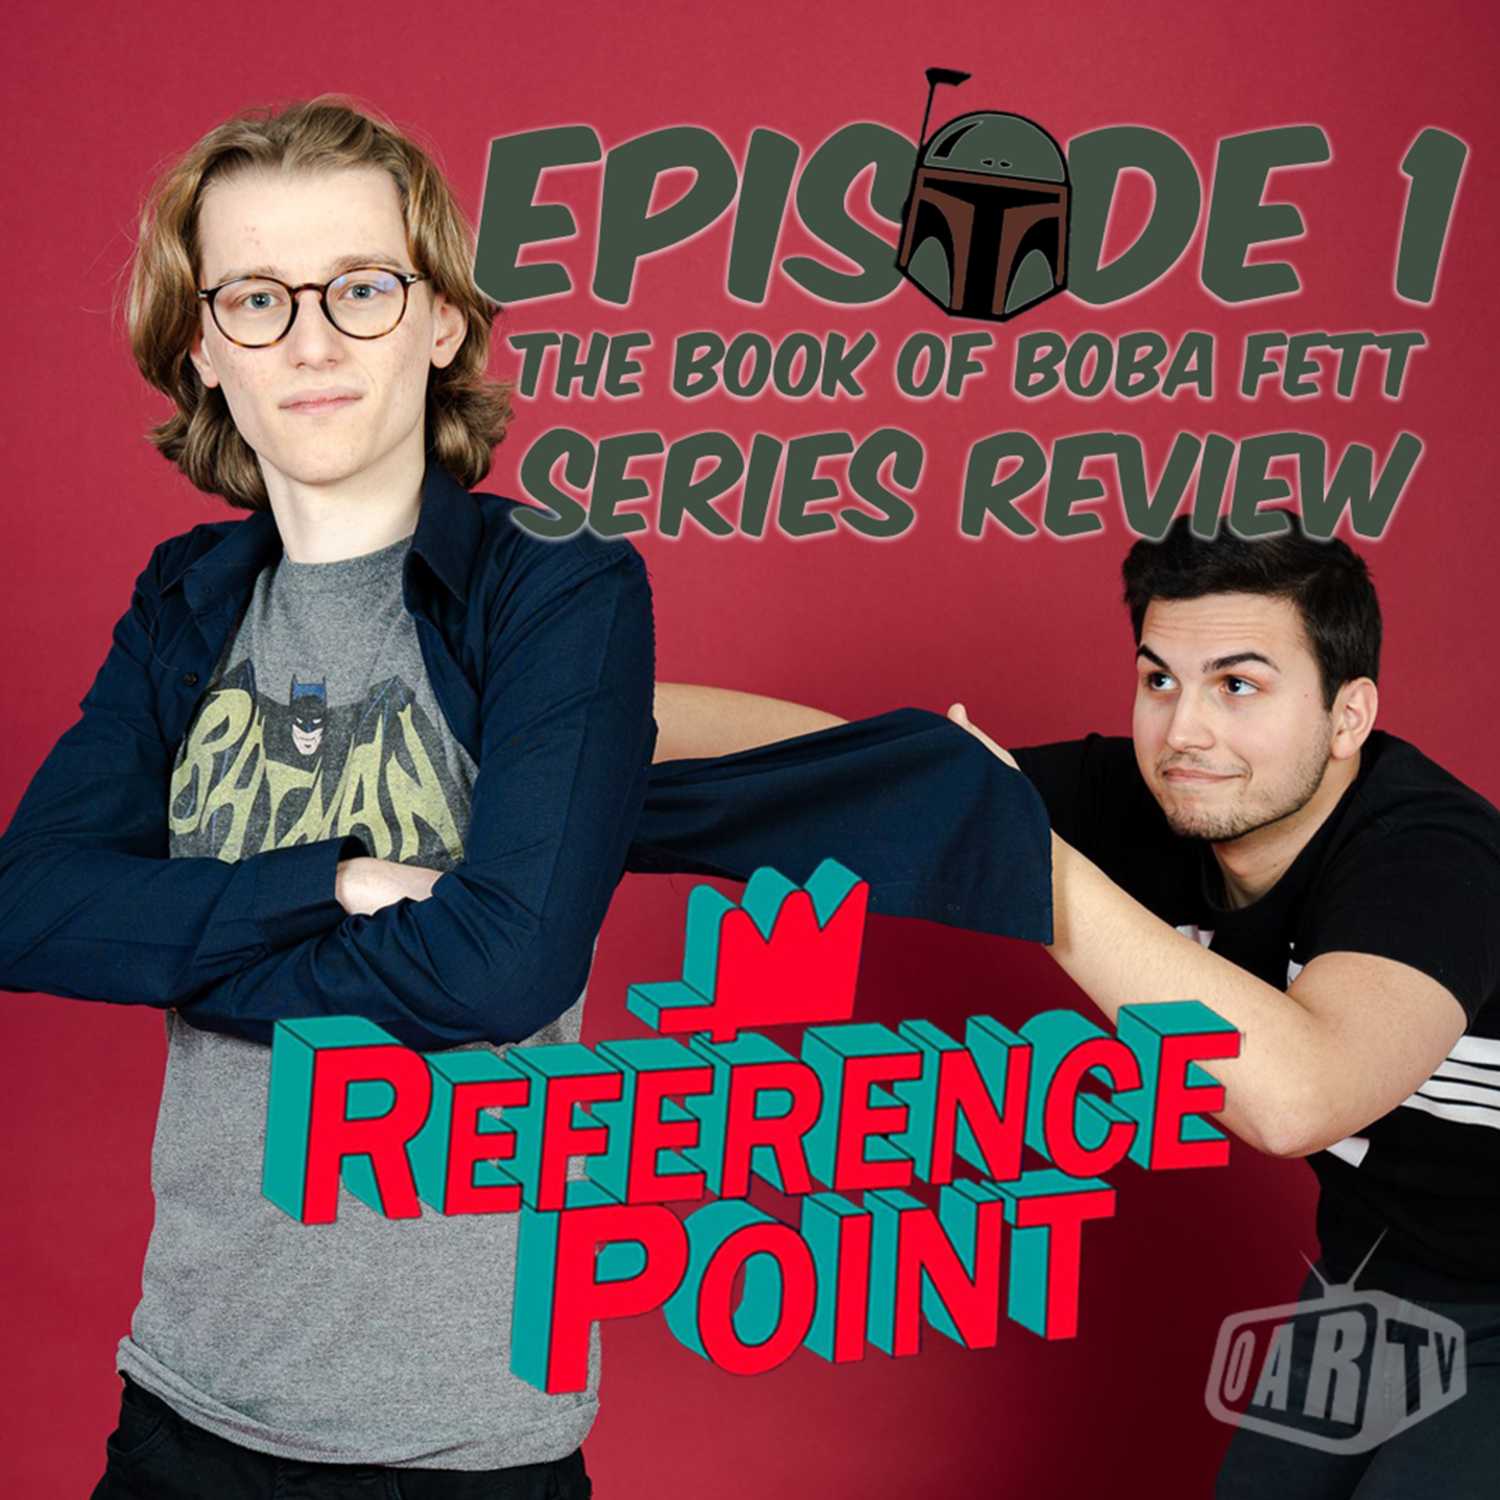 REFERENCE POINT - Episode 1 - The Book of Boba Fett Series Review